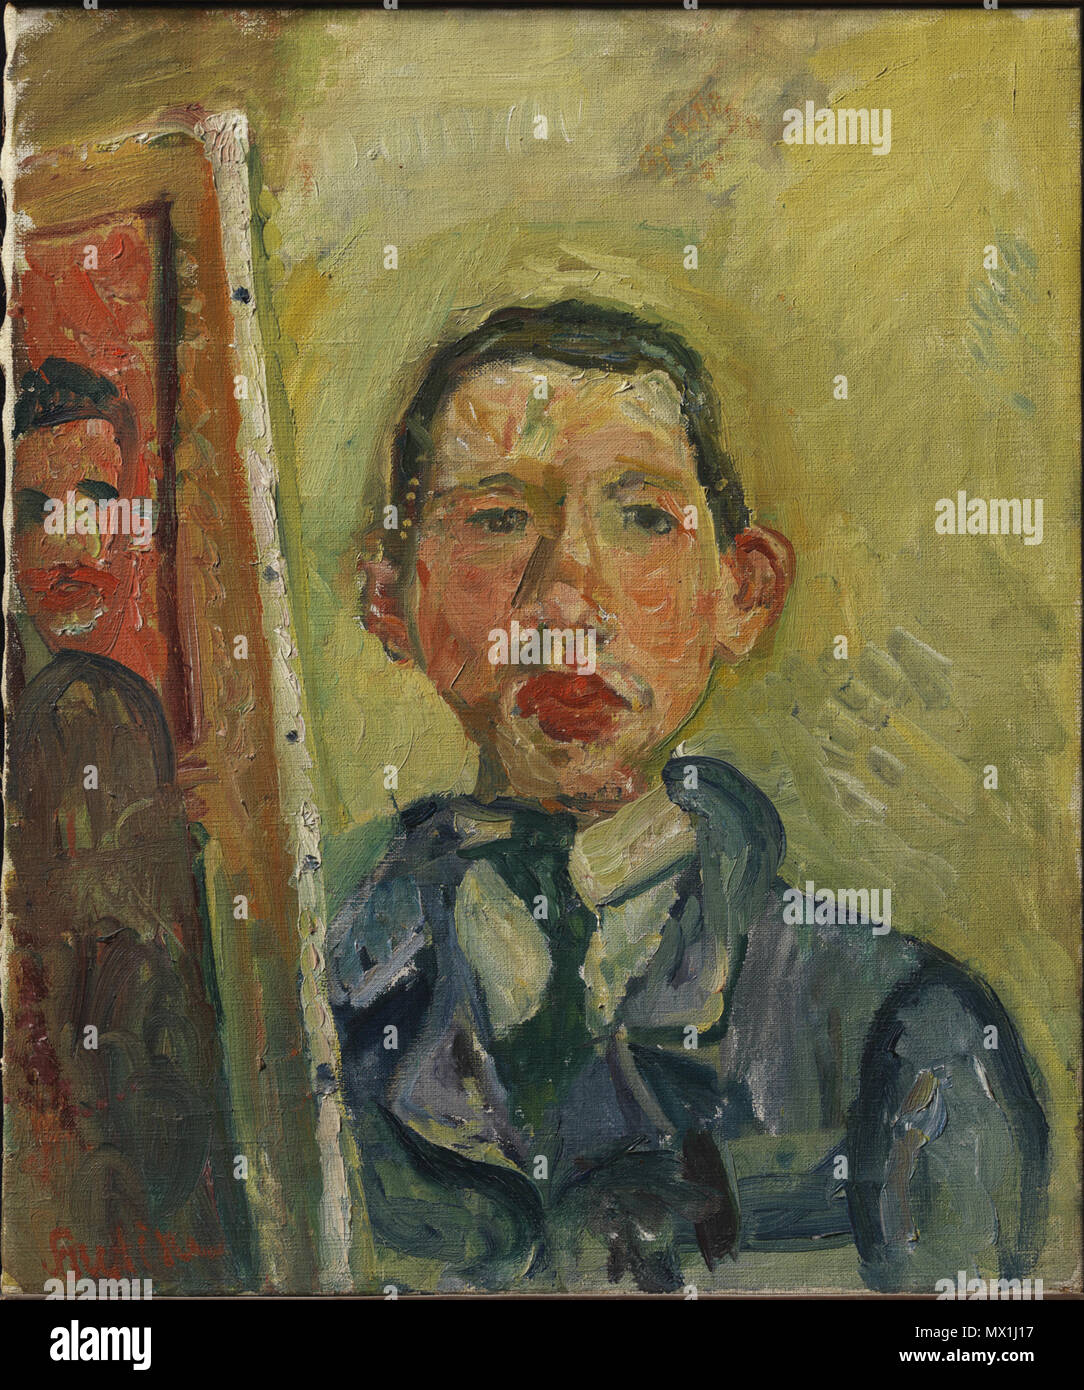 .  English: Chaïm Soutine, Russian, active in France, 1893–1943 Self-Portrait, ca. 1918 Oil on canvas 54.6 x 45.7 cm. (21 1/2 x 18 in.) frame: 80.7 x 71.1 cm (31 3/4 x 28 in.) The Henry and Rose Pearlman Foundation, on long-term loan to the Princeton University Art Museum L.1988.62.23 . circa 1918 12 1918, Soutine, Self Portrait Stock Photo